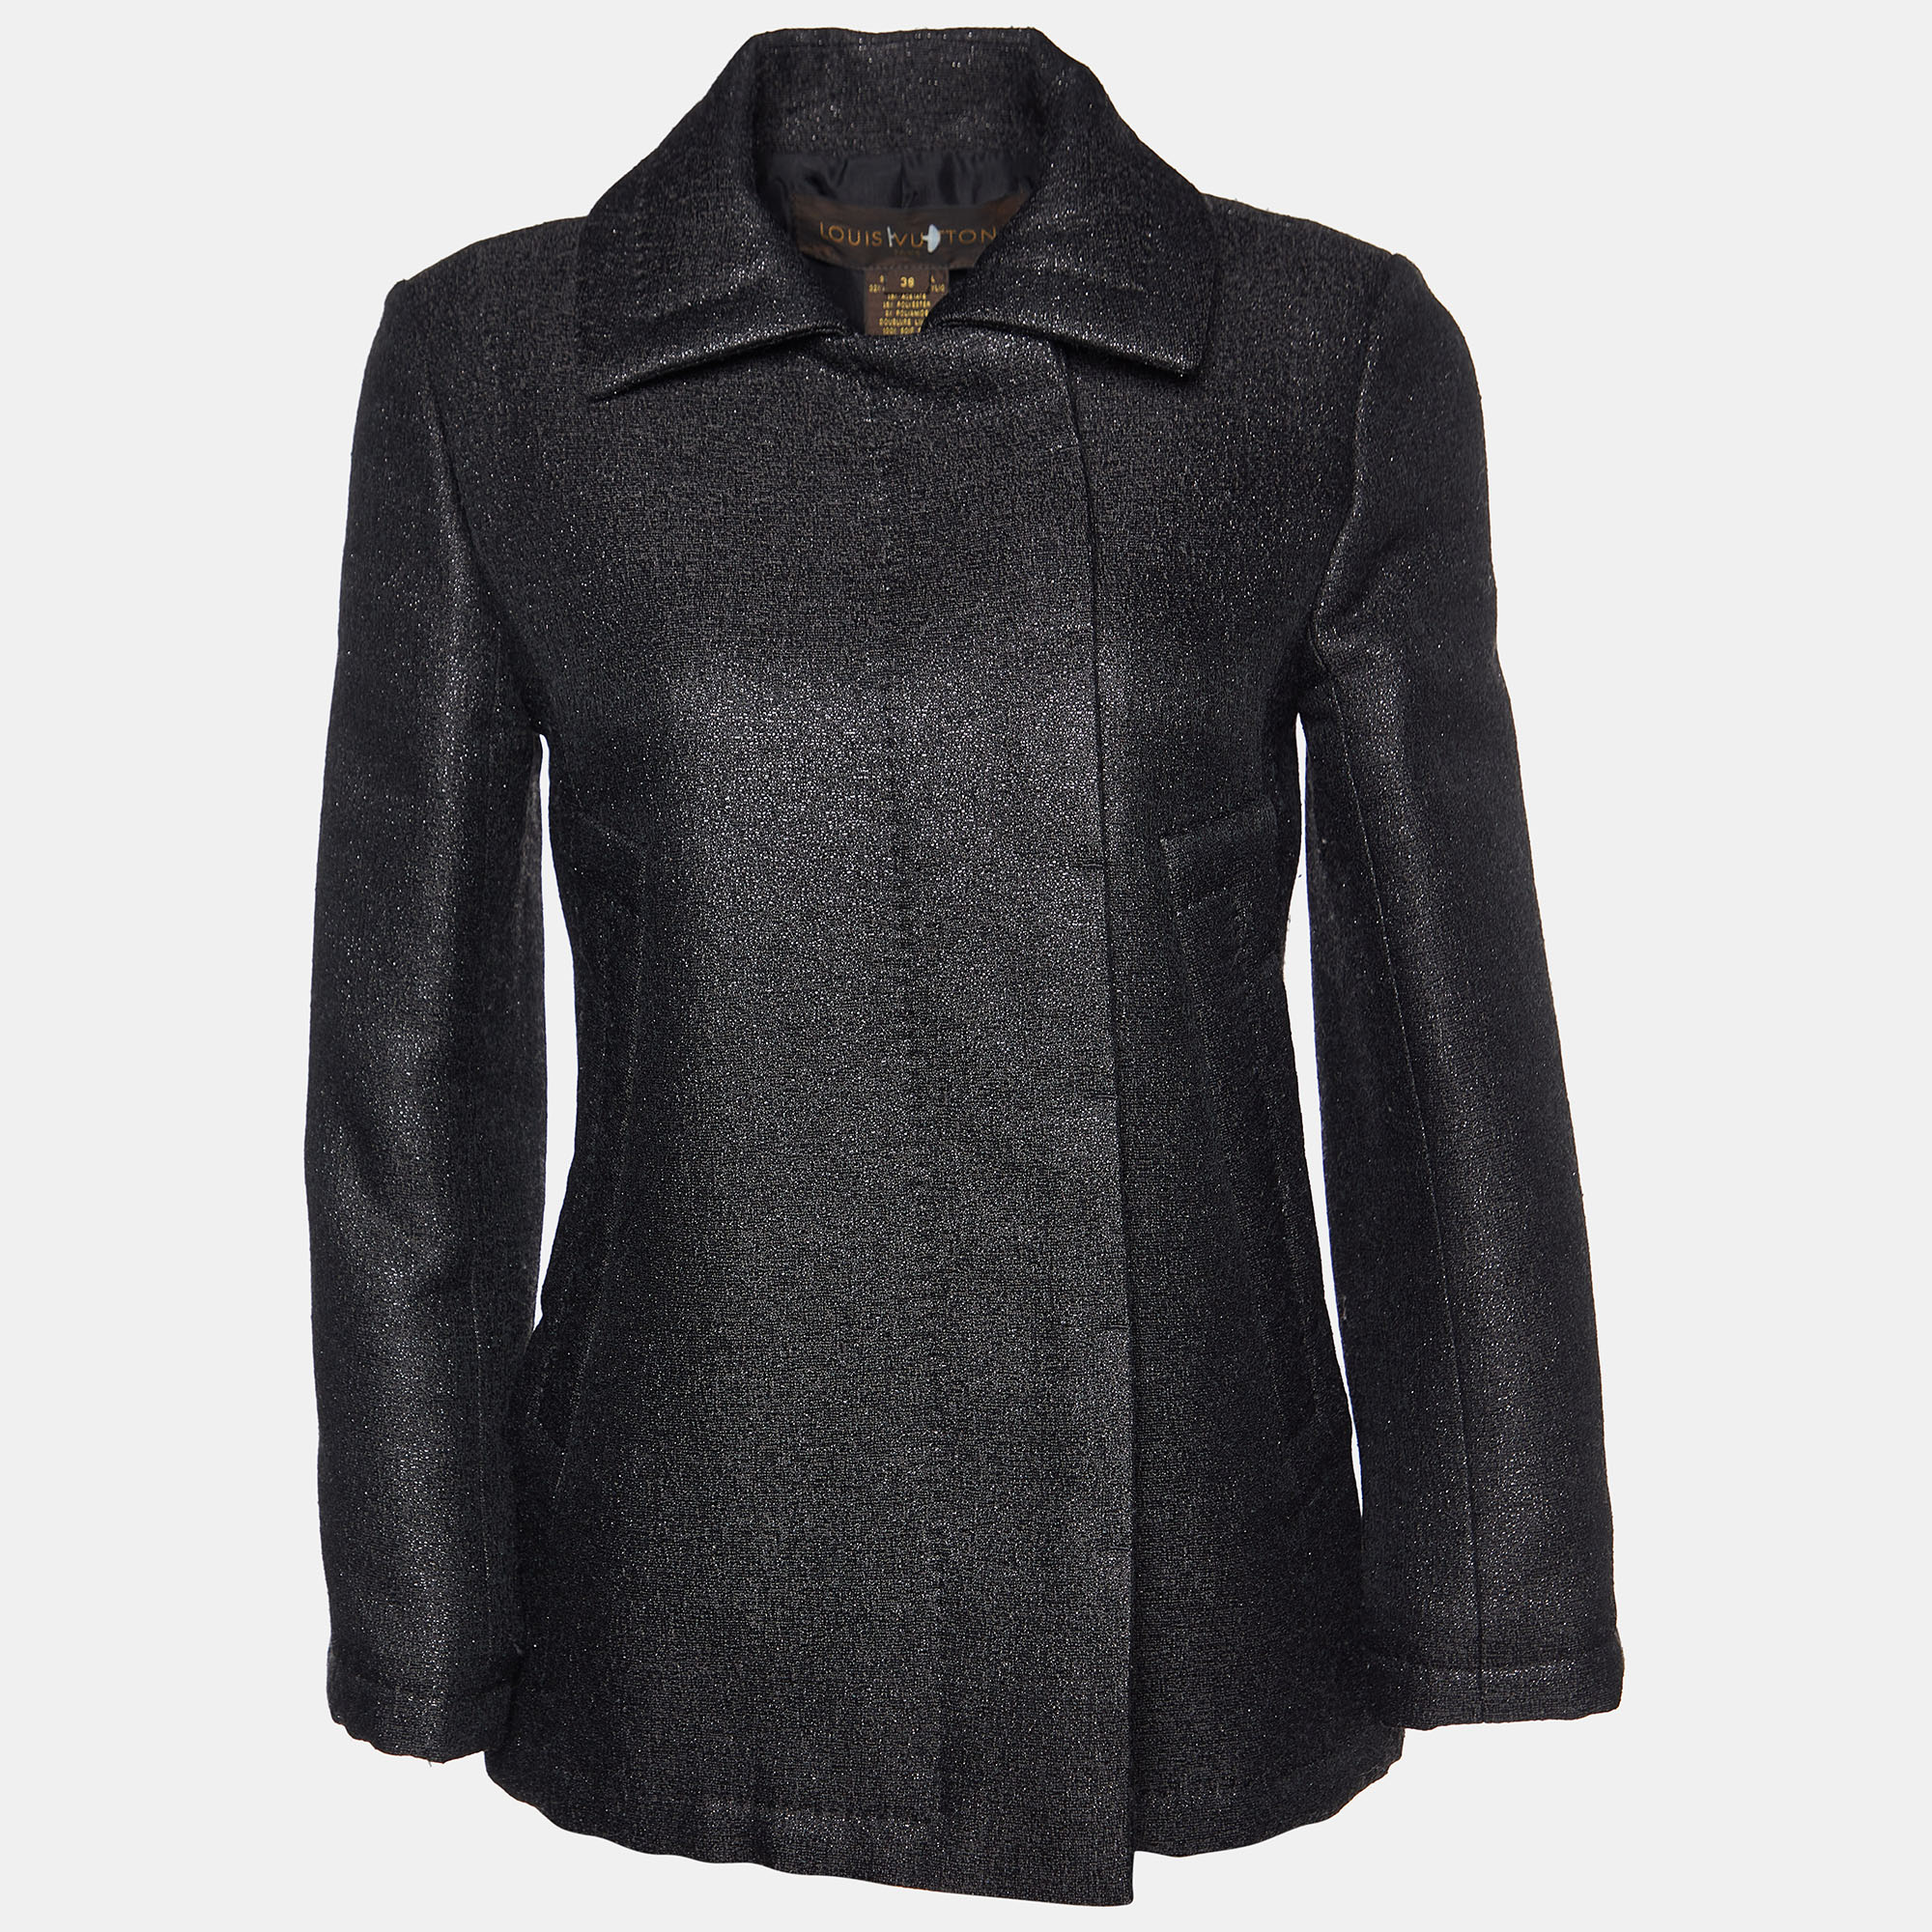 Wrap yourself in timeless elegance with the Louis Vuitton pea coat. Crafted with meticulous attention to detail this luxurious outerwear piece exudes sophistication and refinement. Its lustrous black lurex wool fabric offers both warmth and style making it a statement piece for any occasion.